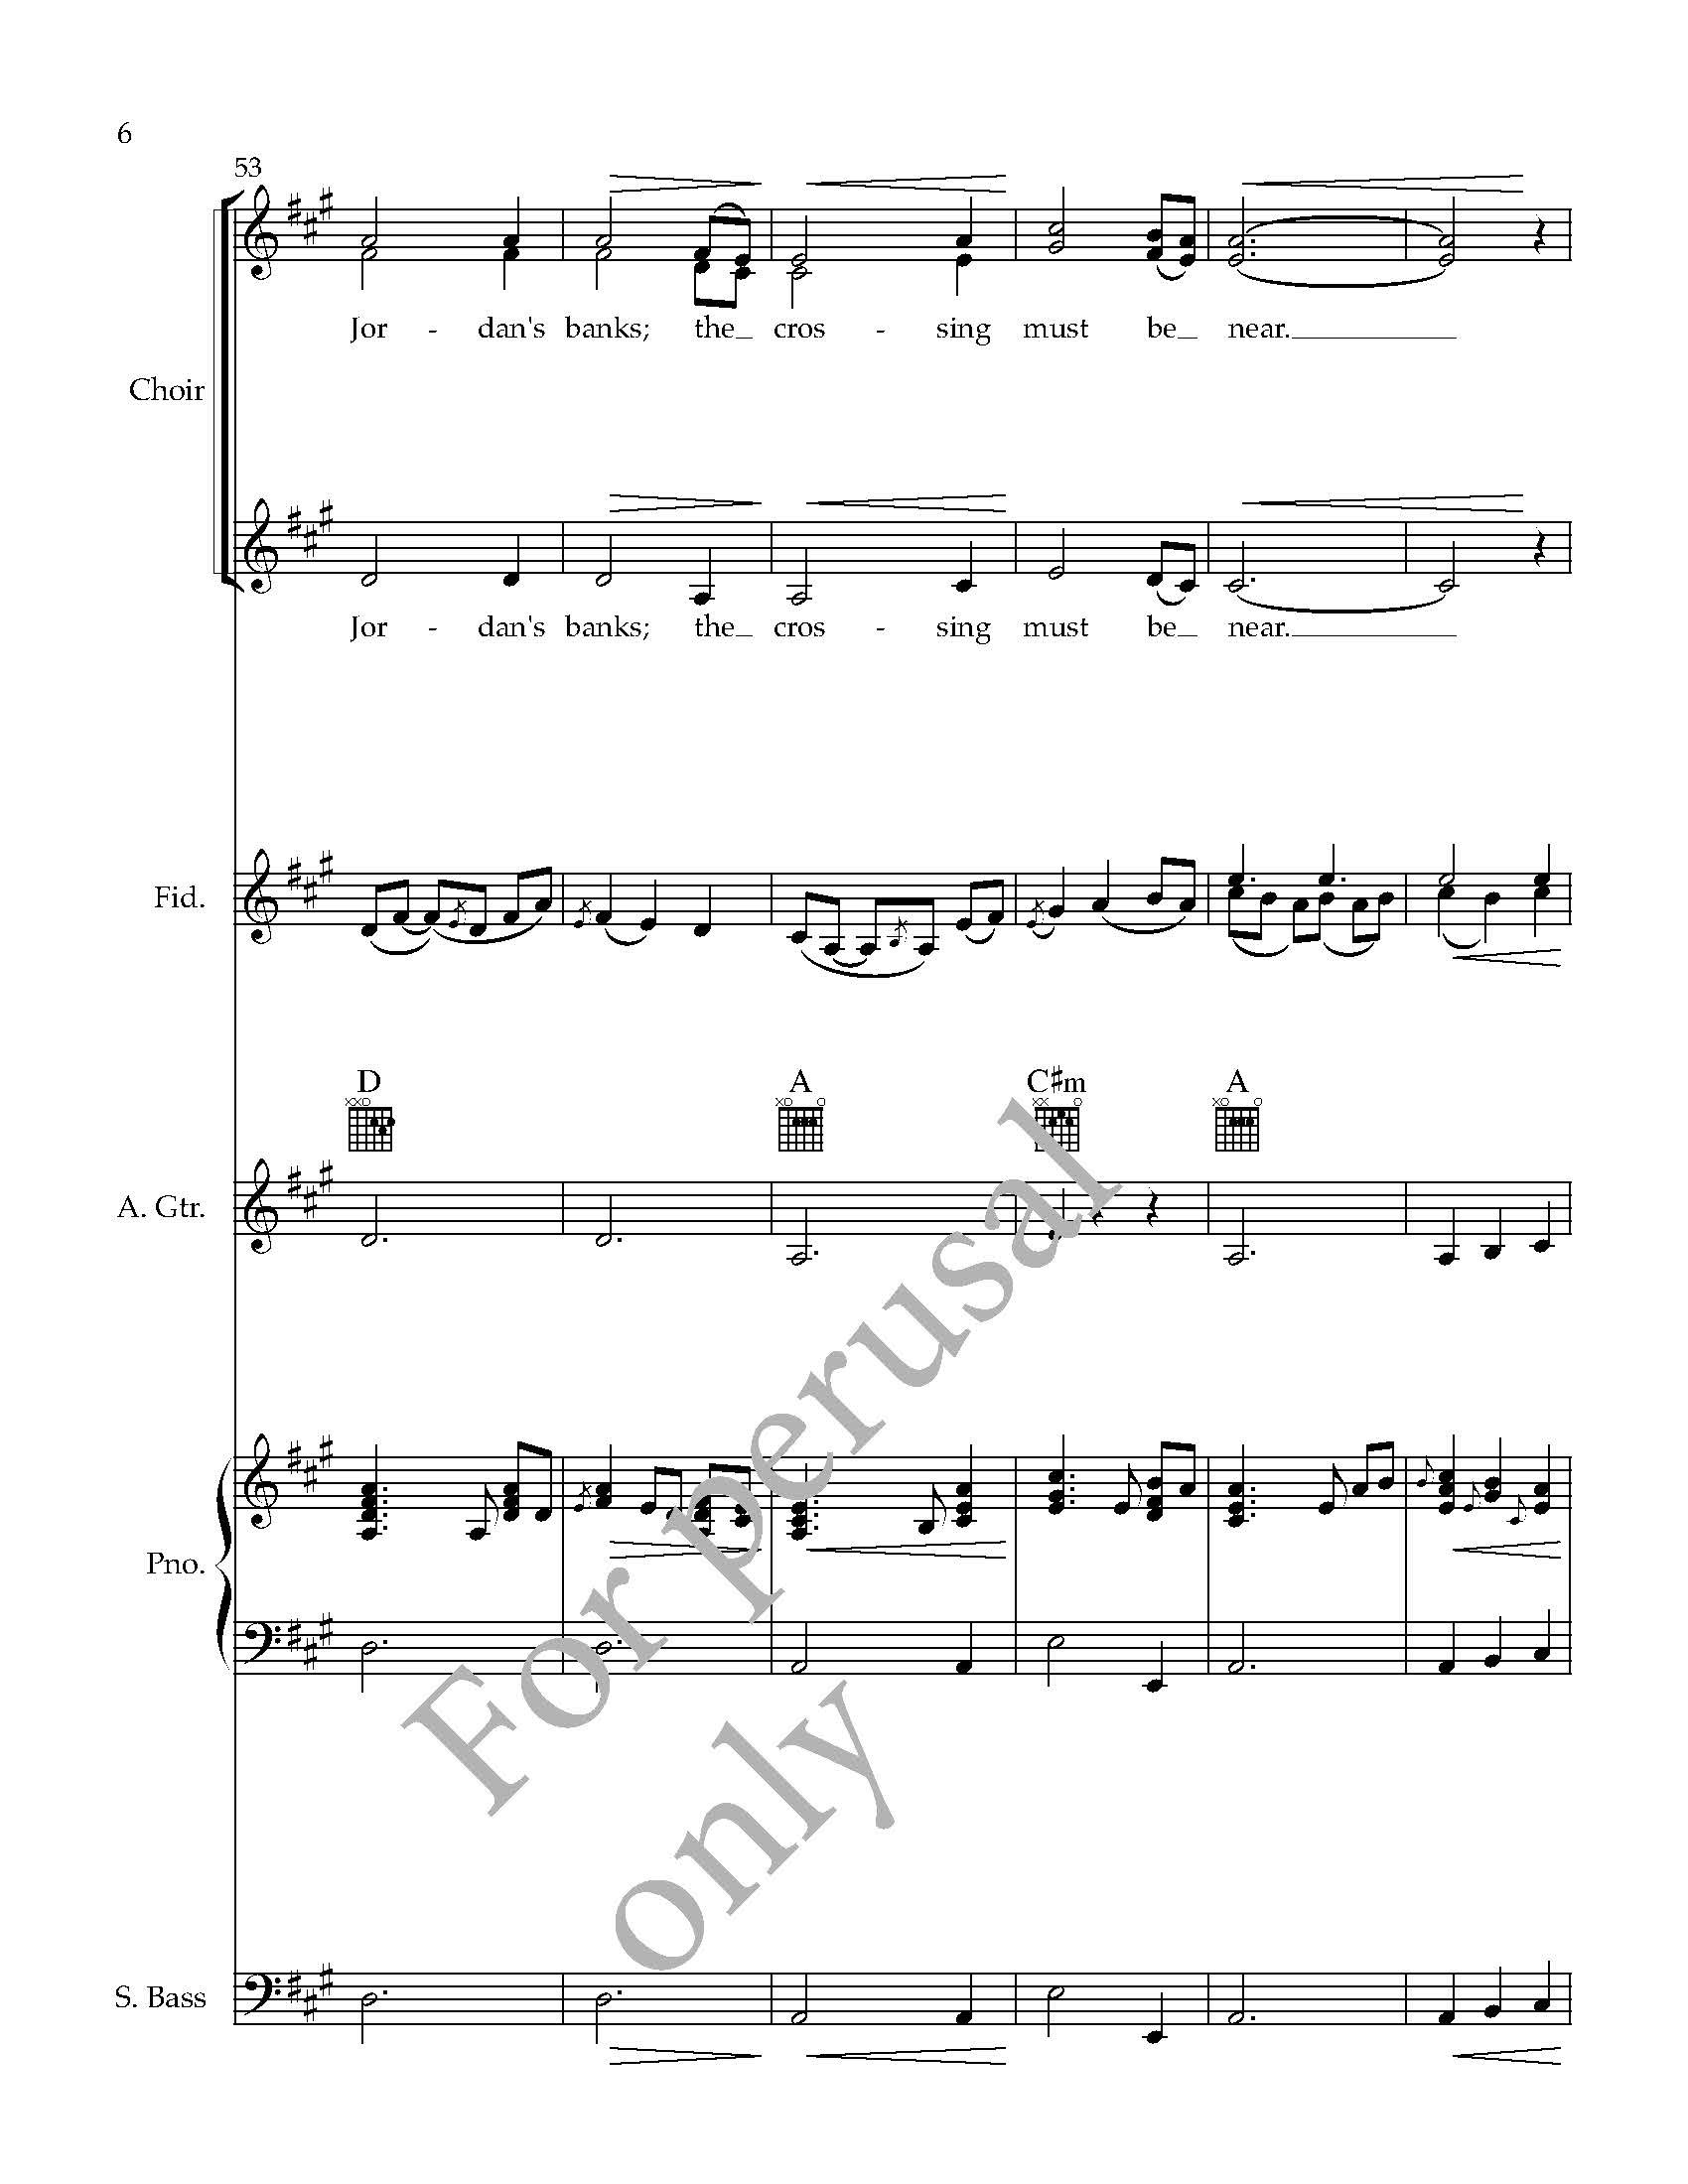 FULL SCORE preview - Angel Band for three-part choir, fiddle, piano, guitar, and bass - arr_Page_06.jpg